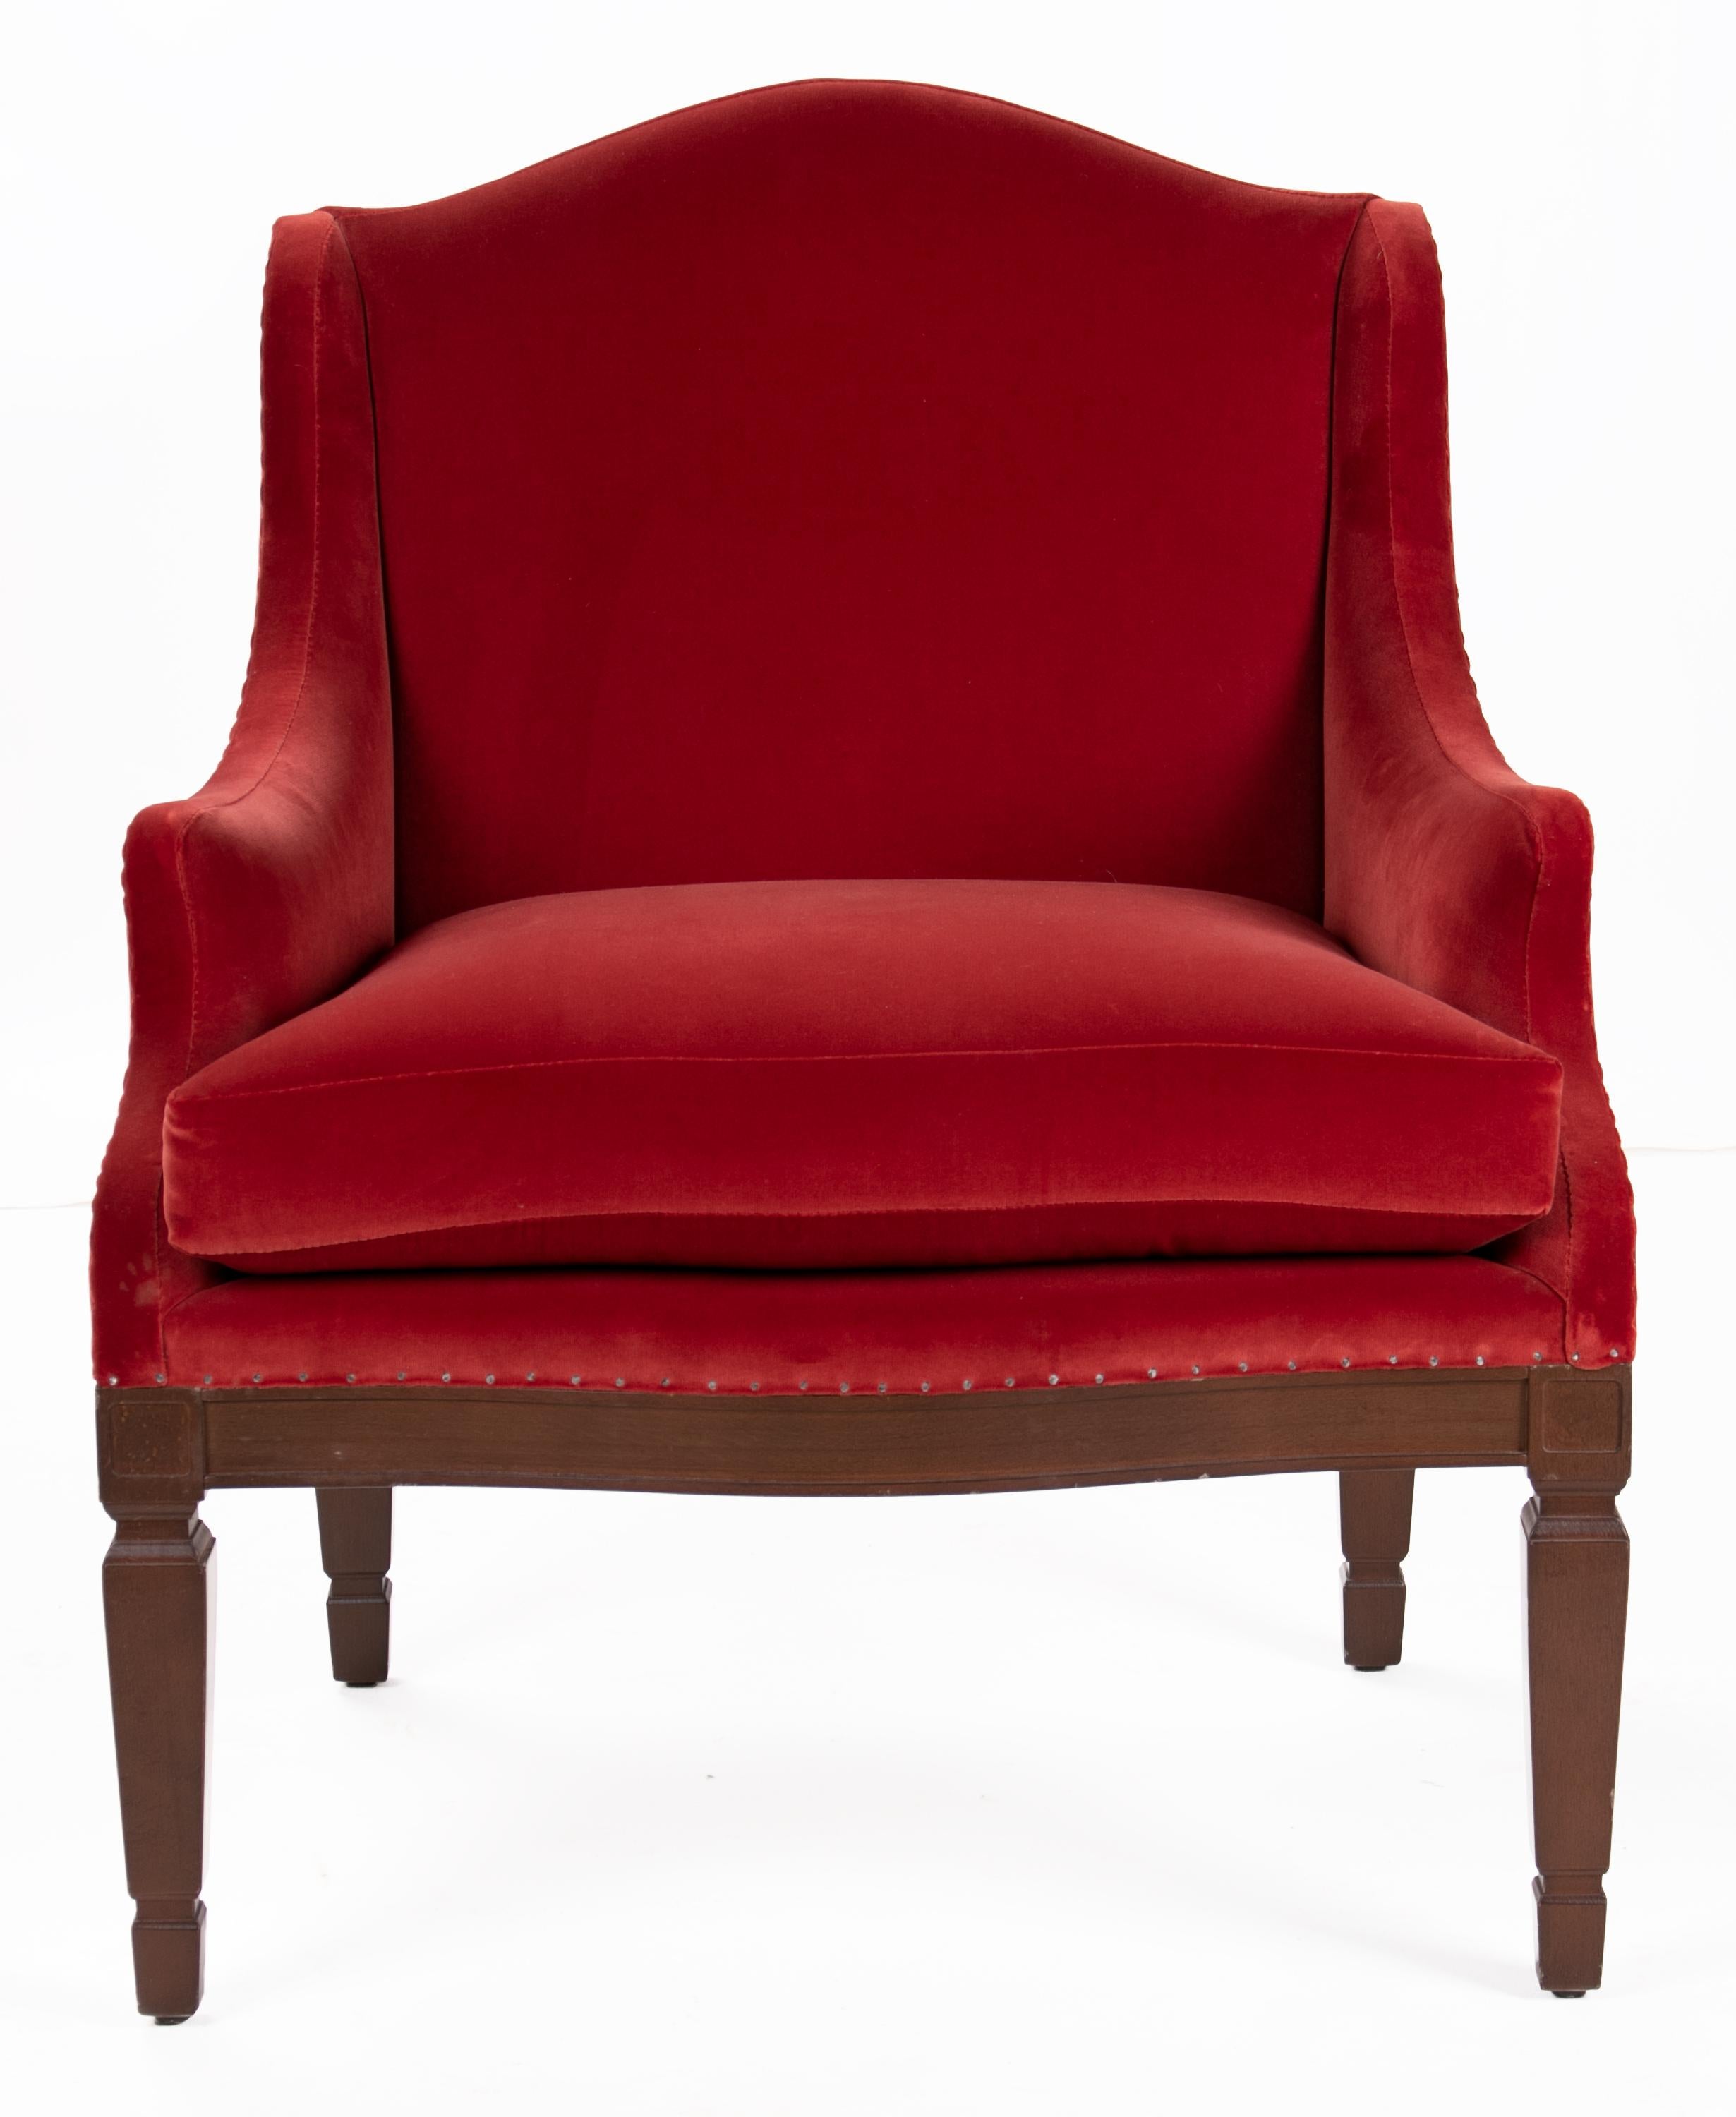 Set of six red upholstered wooden armchairs.